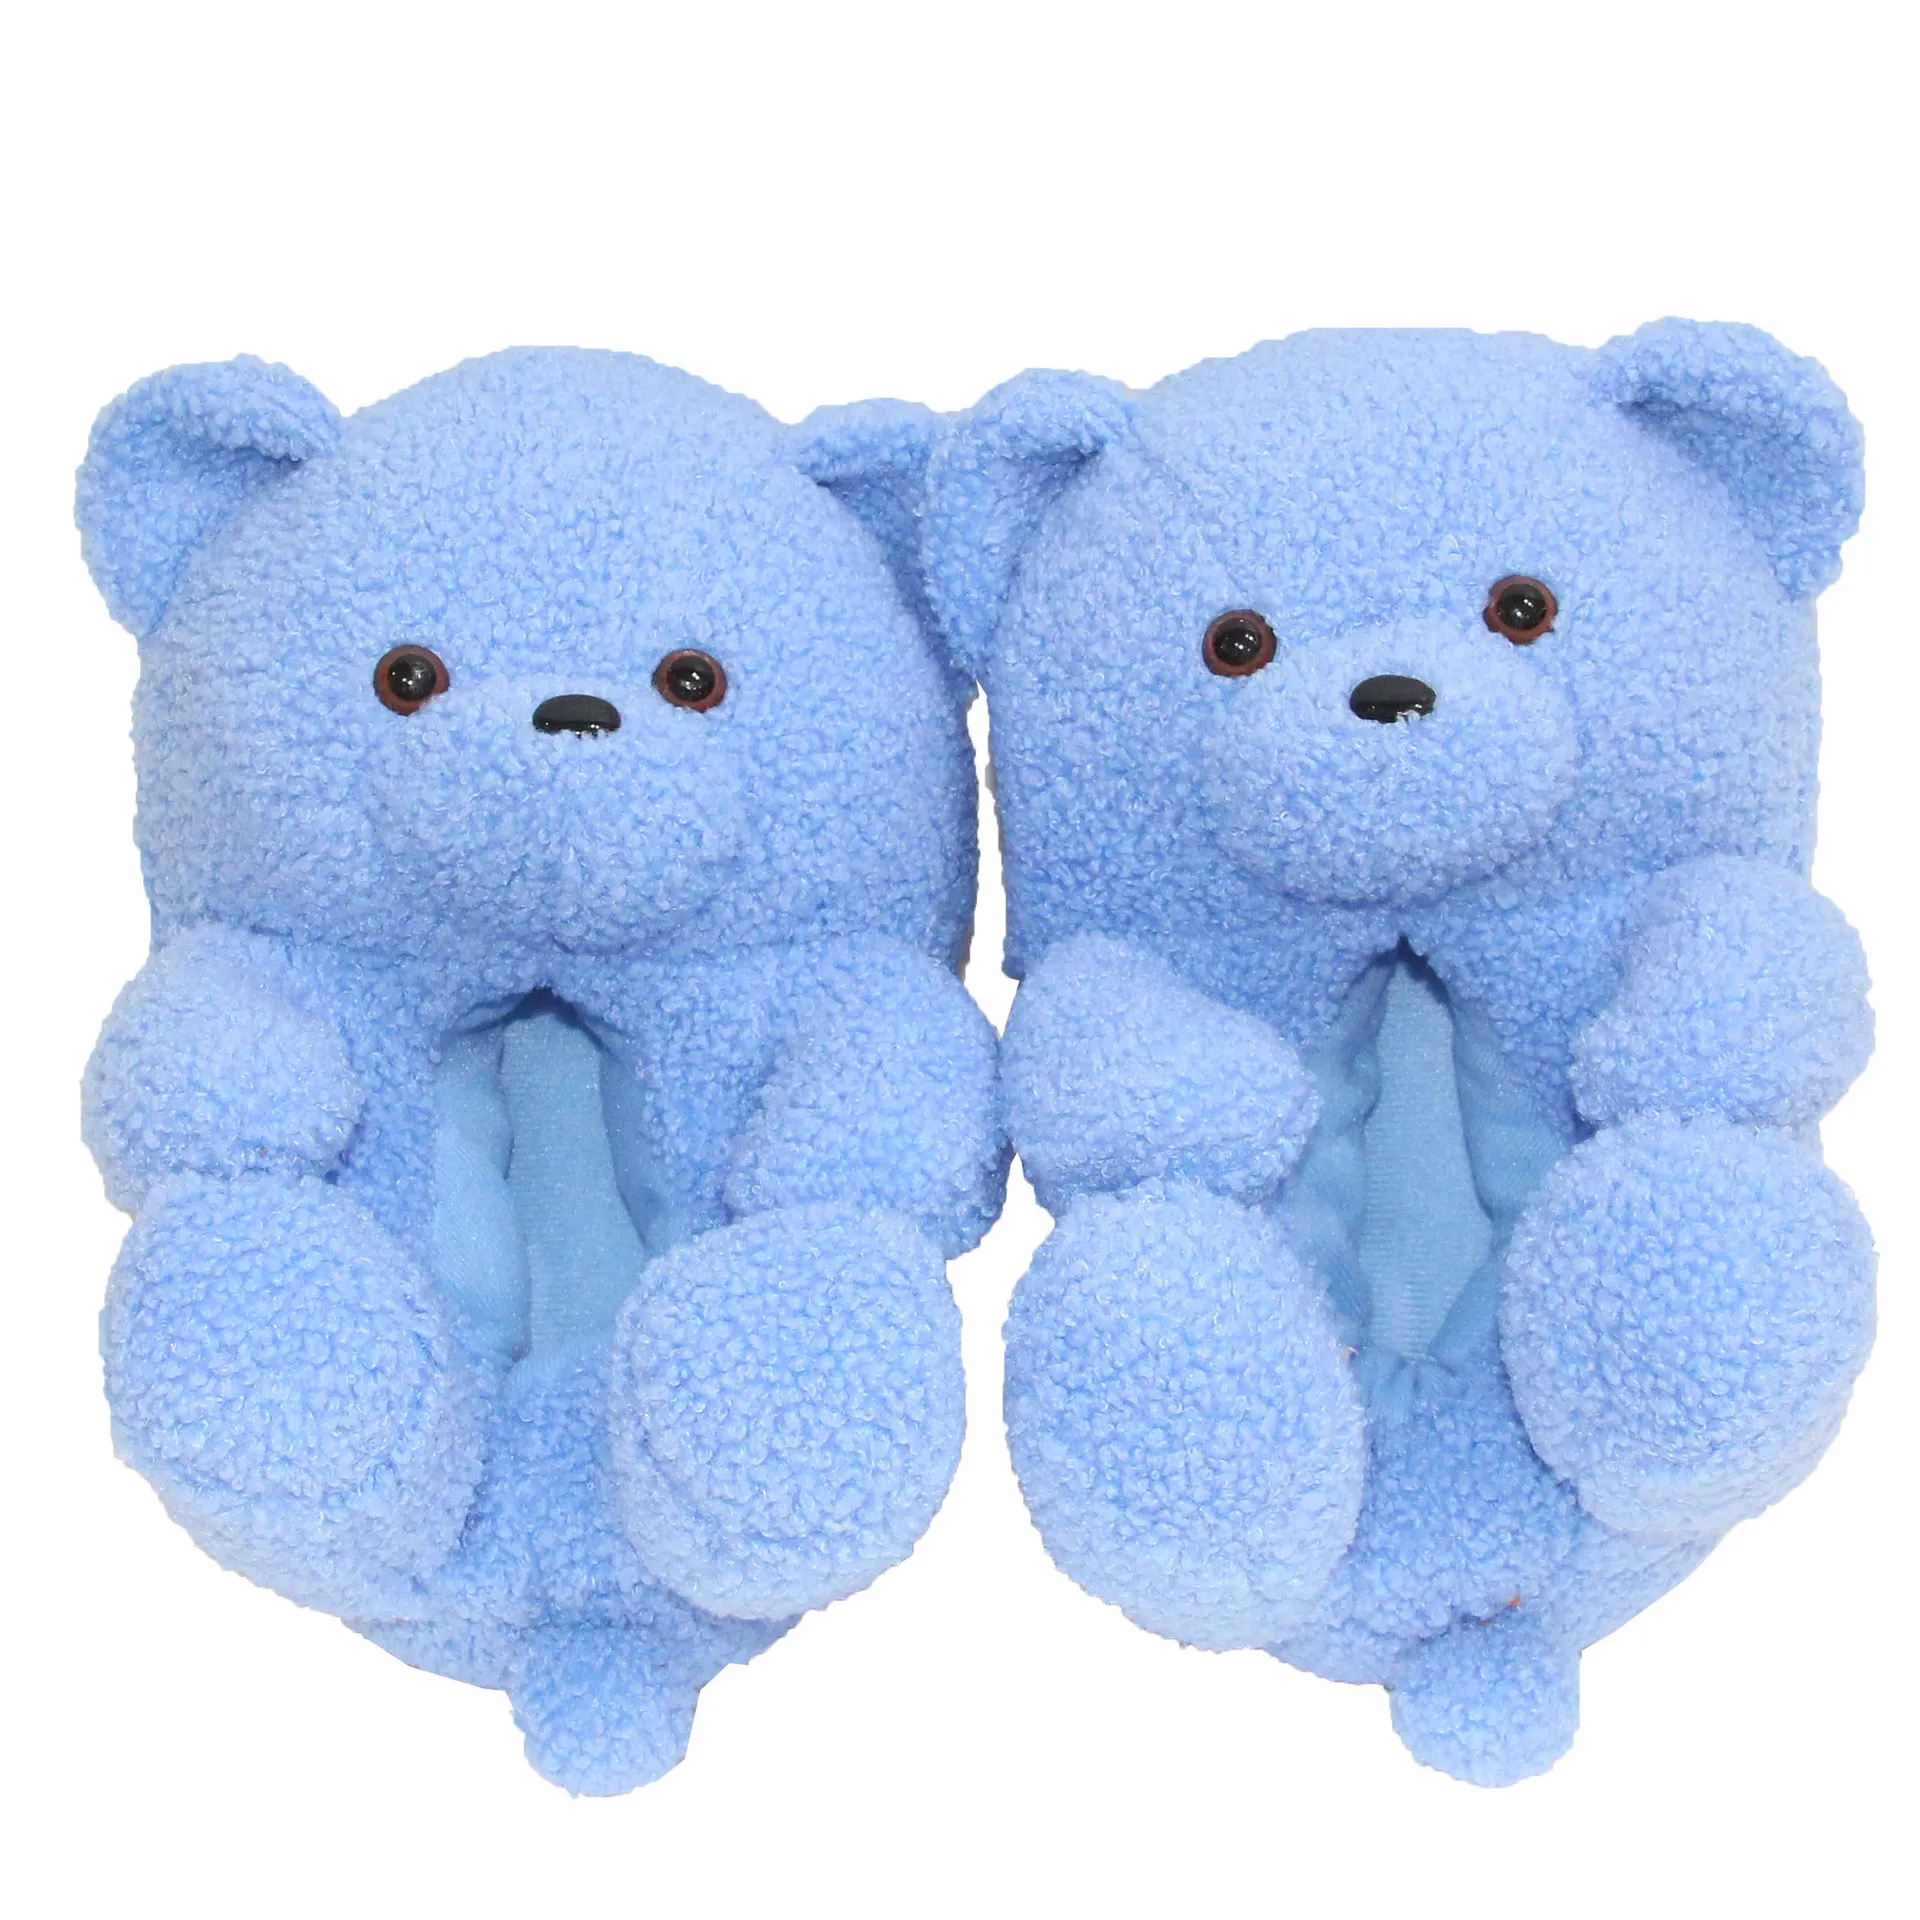 

kids teddy bear slippers 2021 new arrivals Wholesale Plush  fits all 1-3 years old children toddler teddy bear slippers, As picture